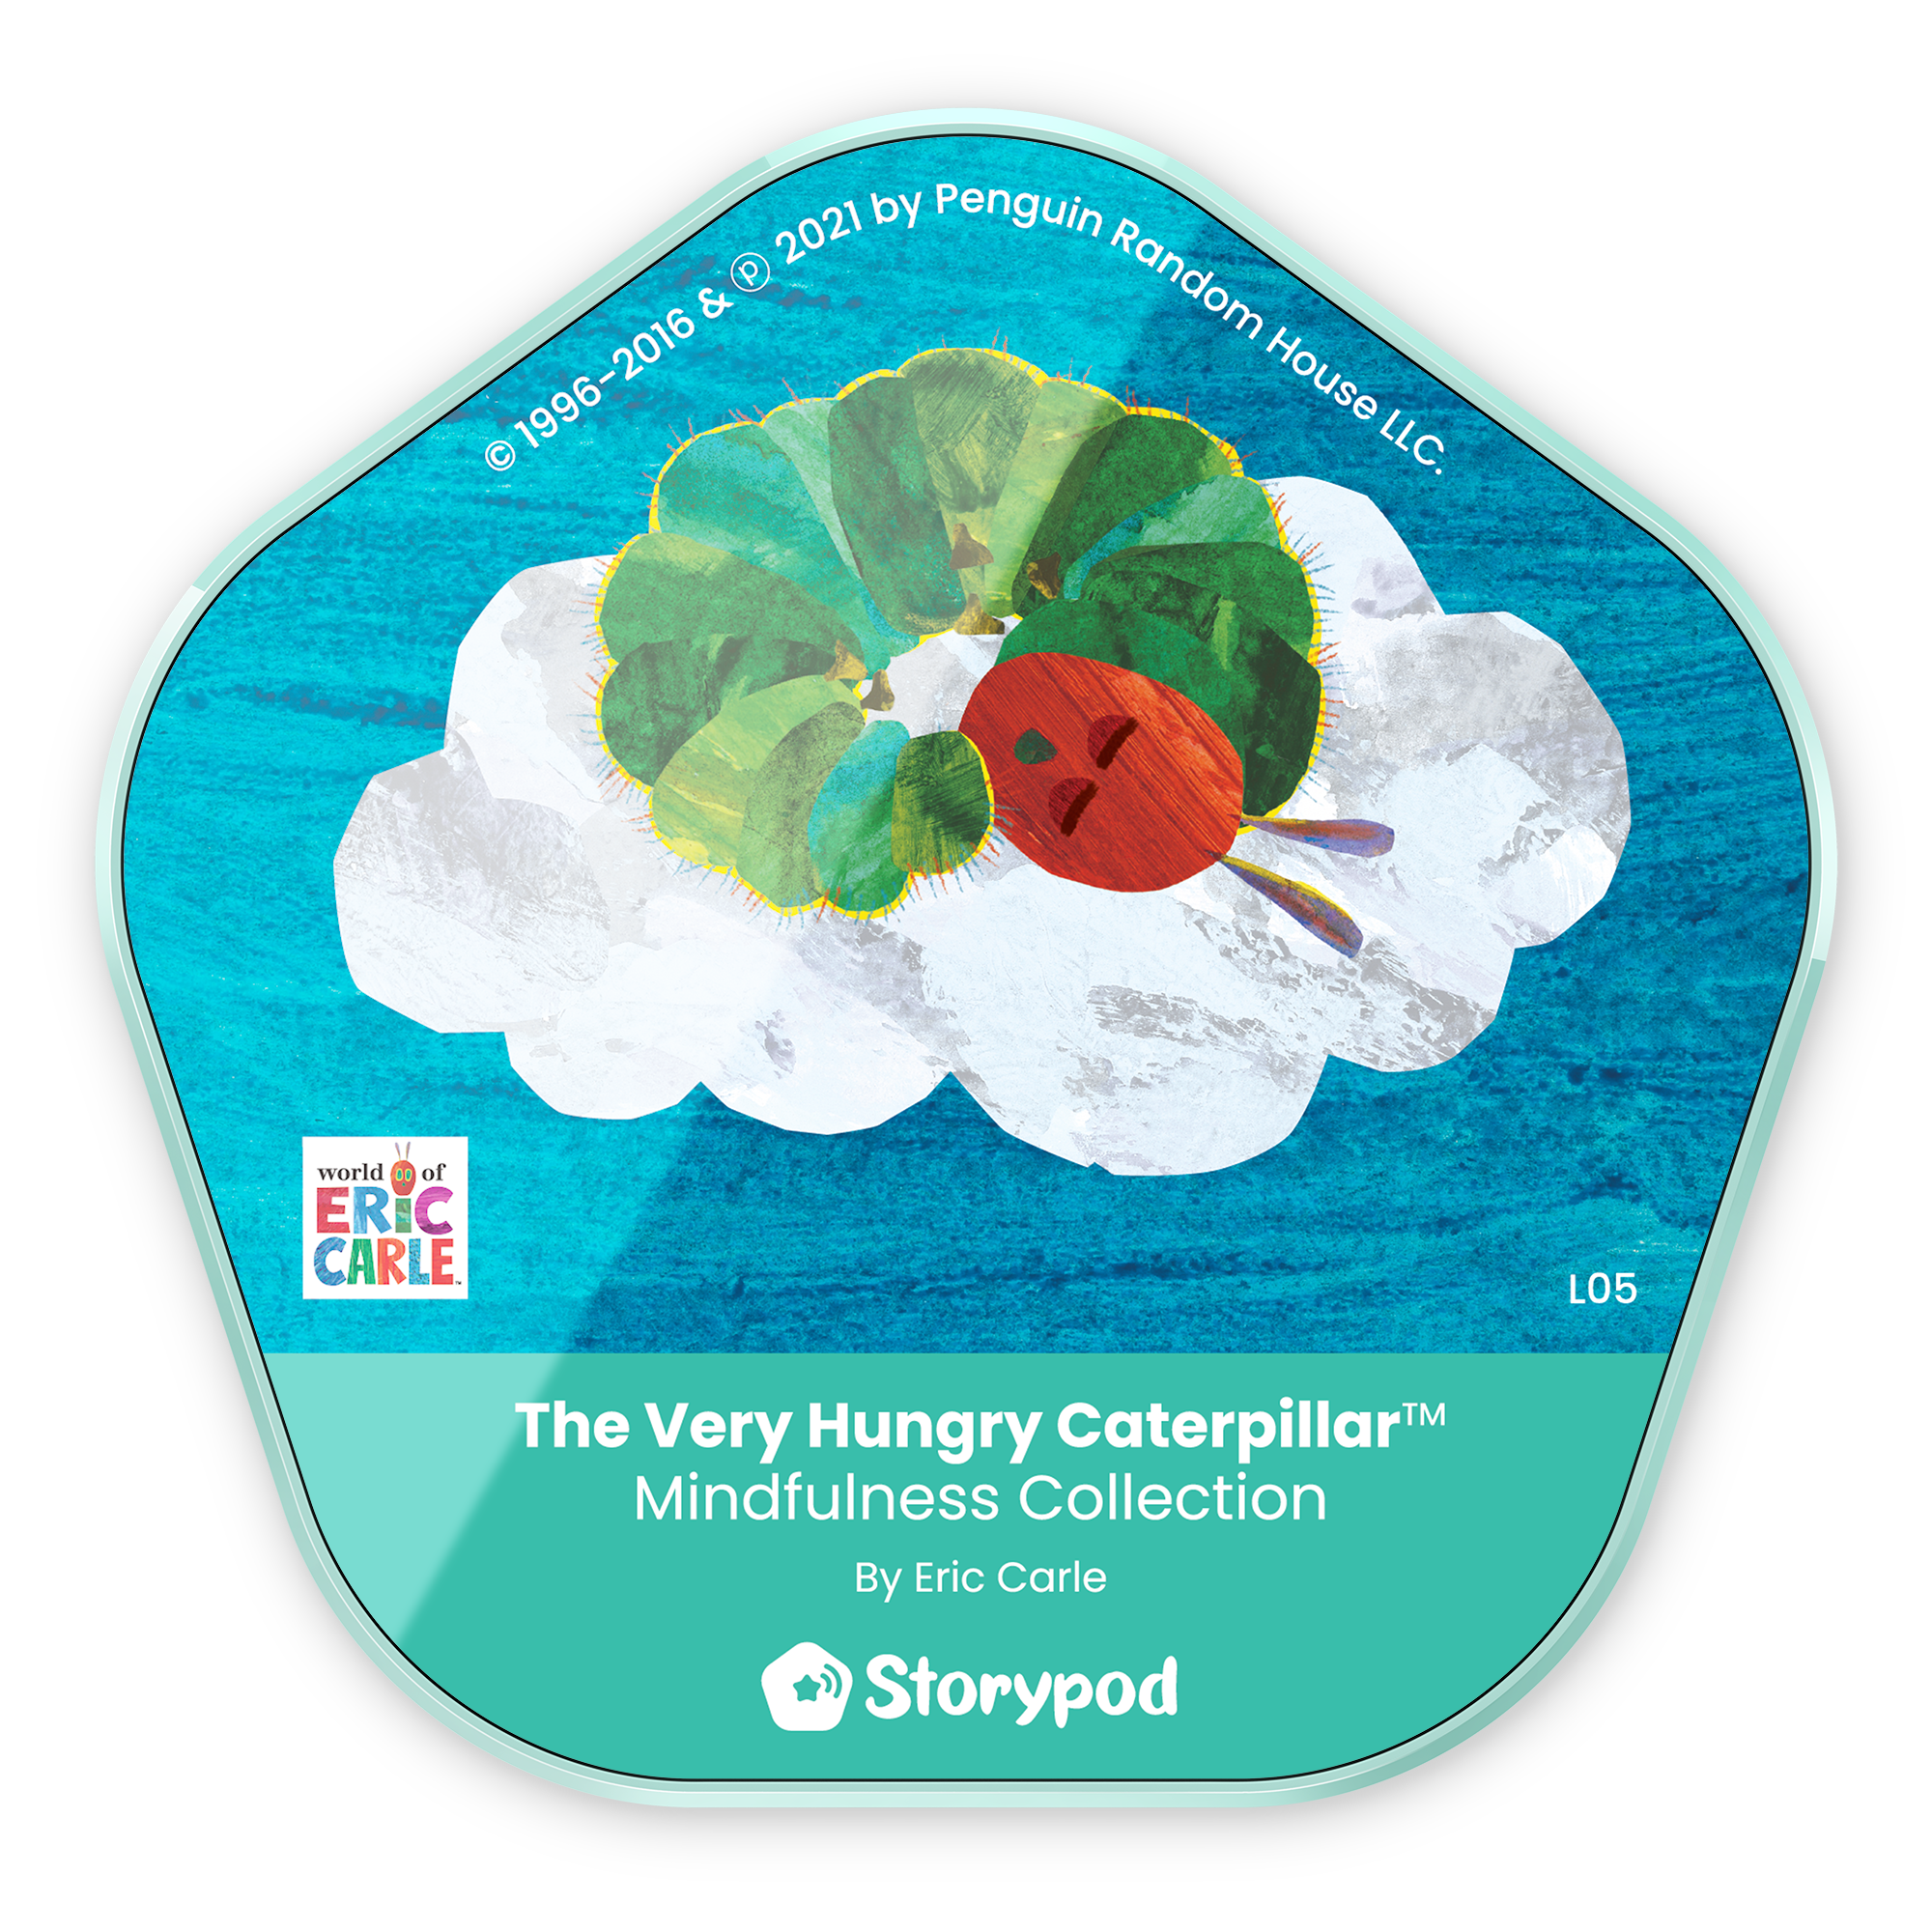 The Very Hungry Caterpillar Mindfulness Collection